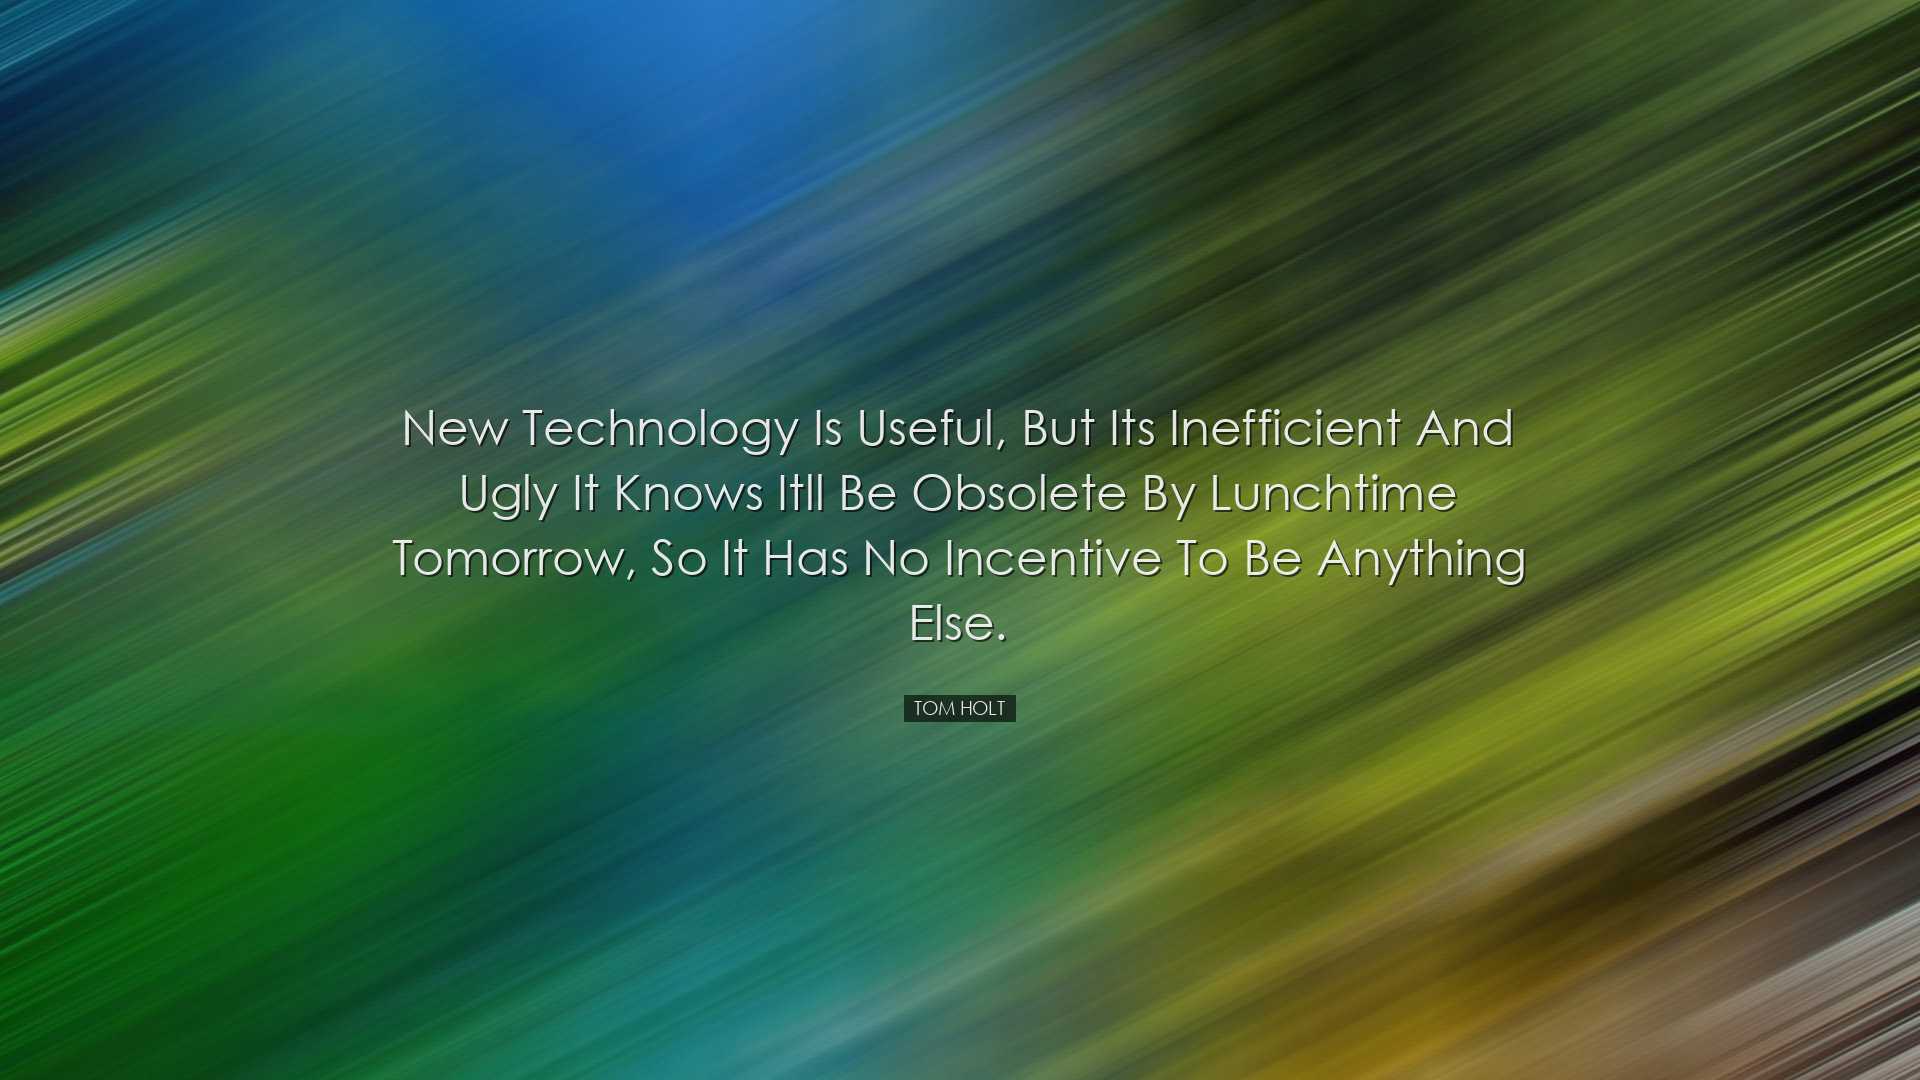 New technology is useful, but its inefficient and ugly it knows it